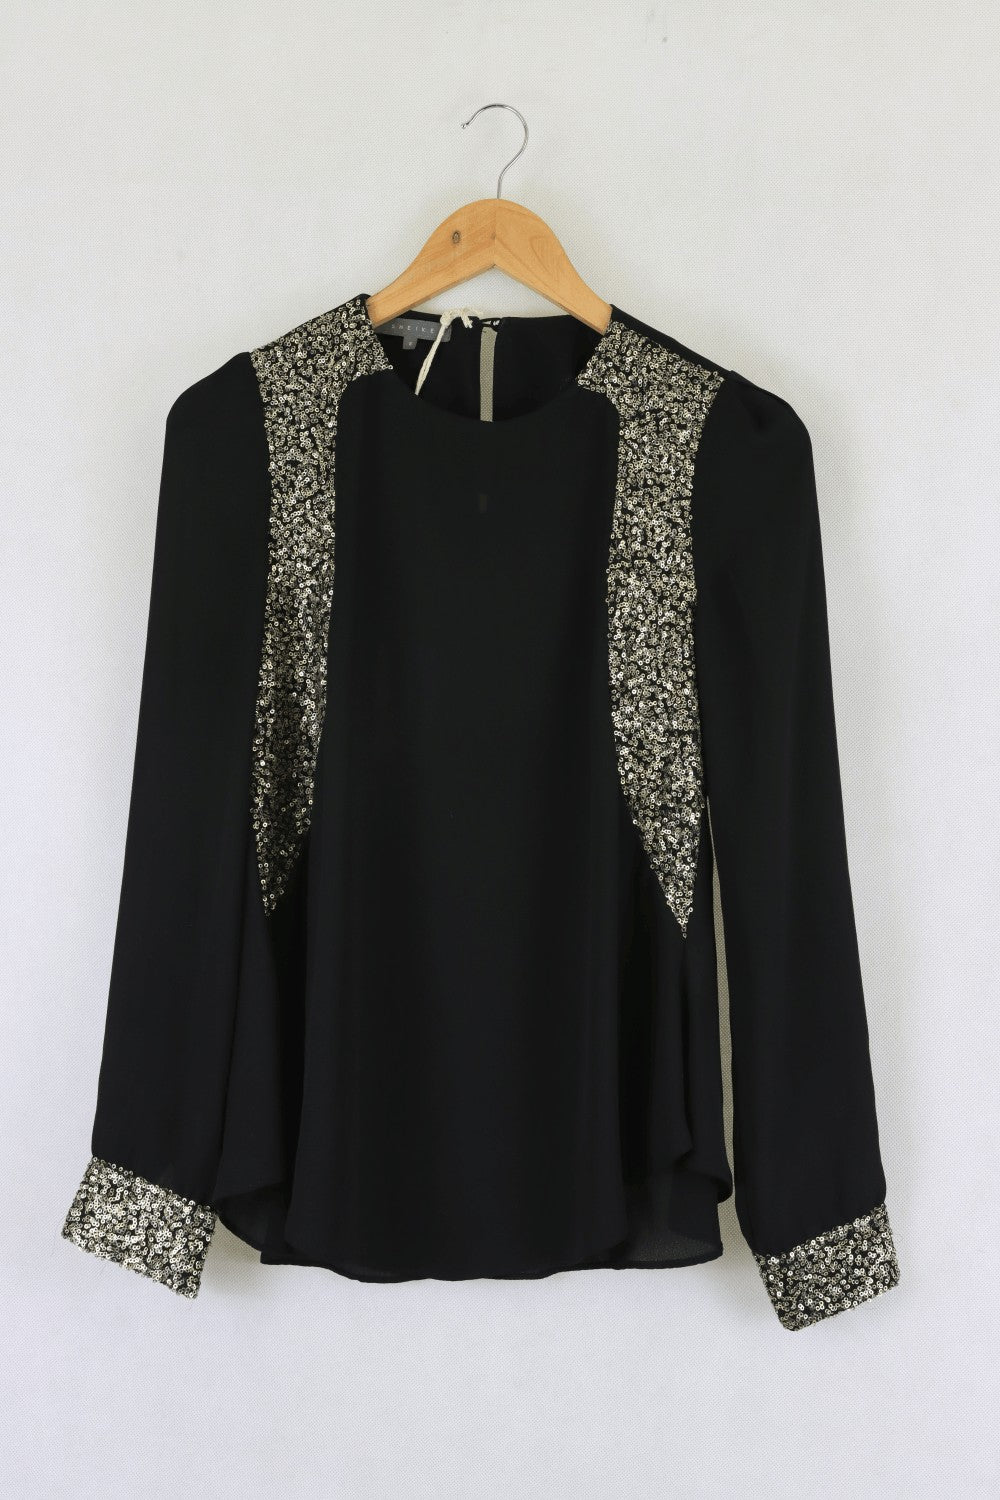 Sheike black top with gold detailing 8